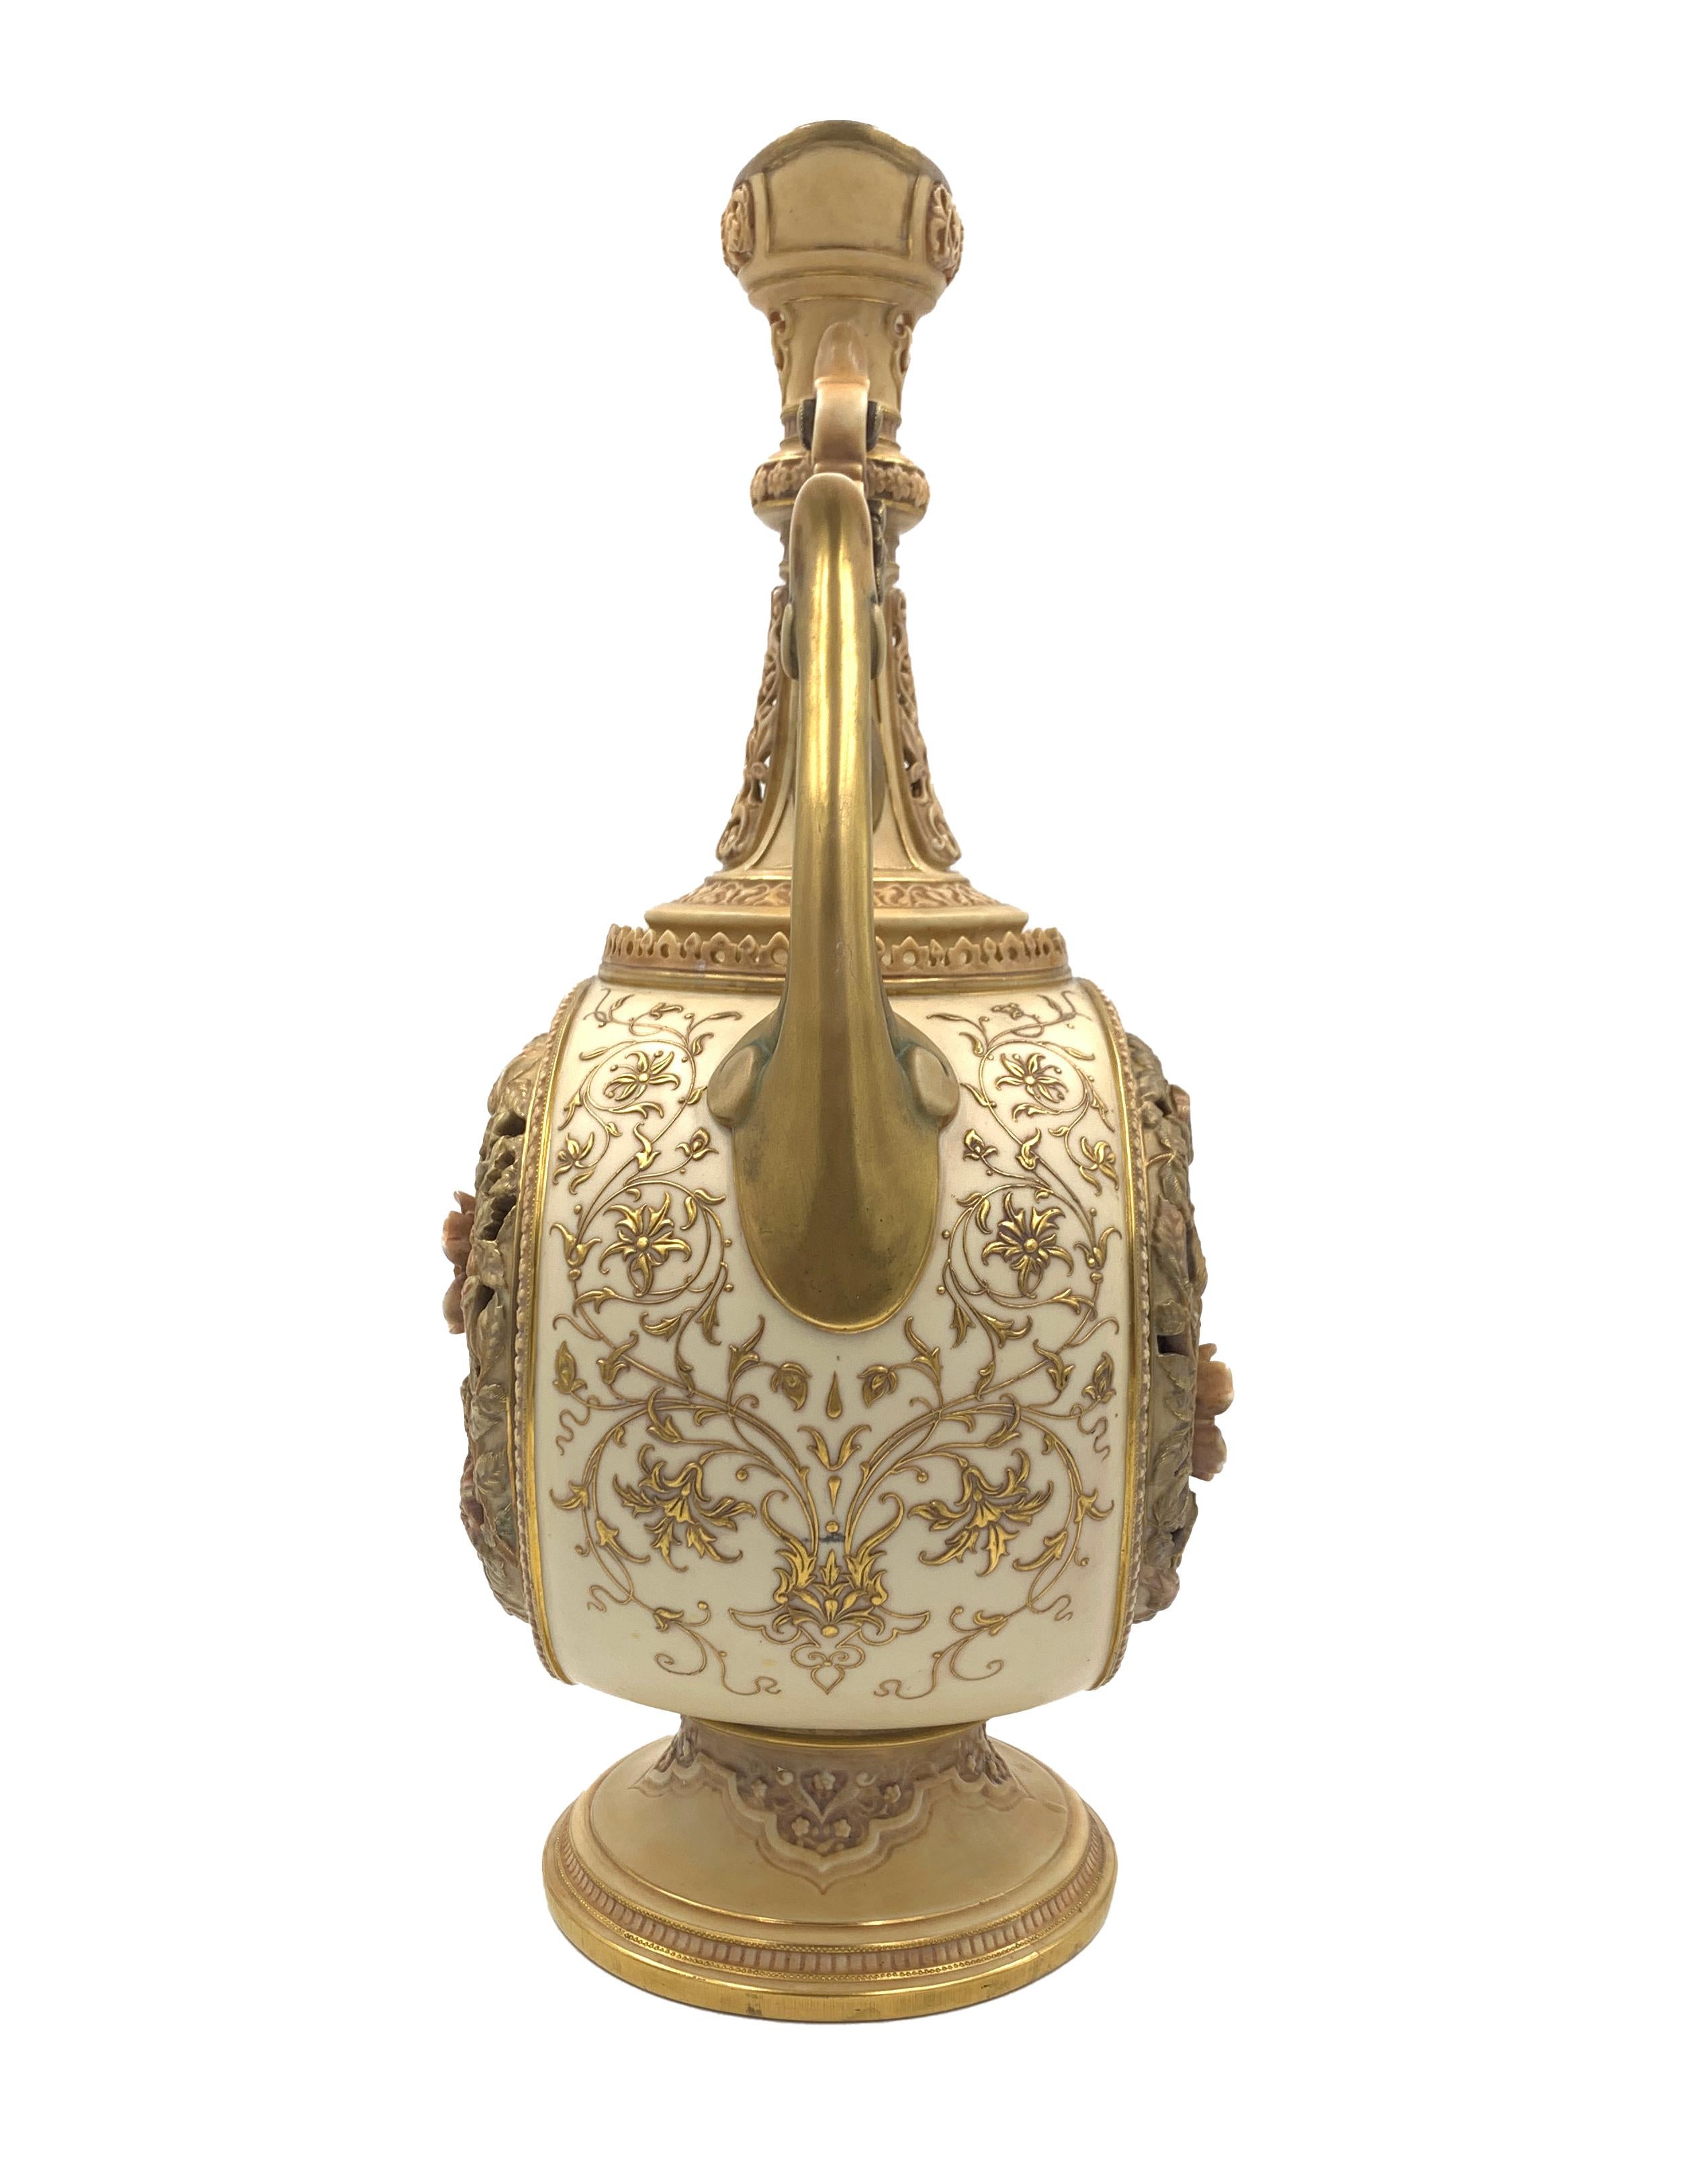 A fine late 19th century vase in floral design, headed handles and strong gilt decoration from the sides.
 